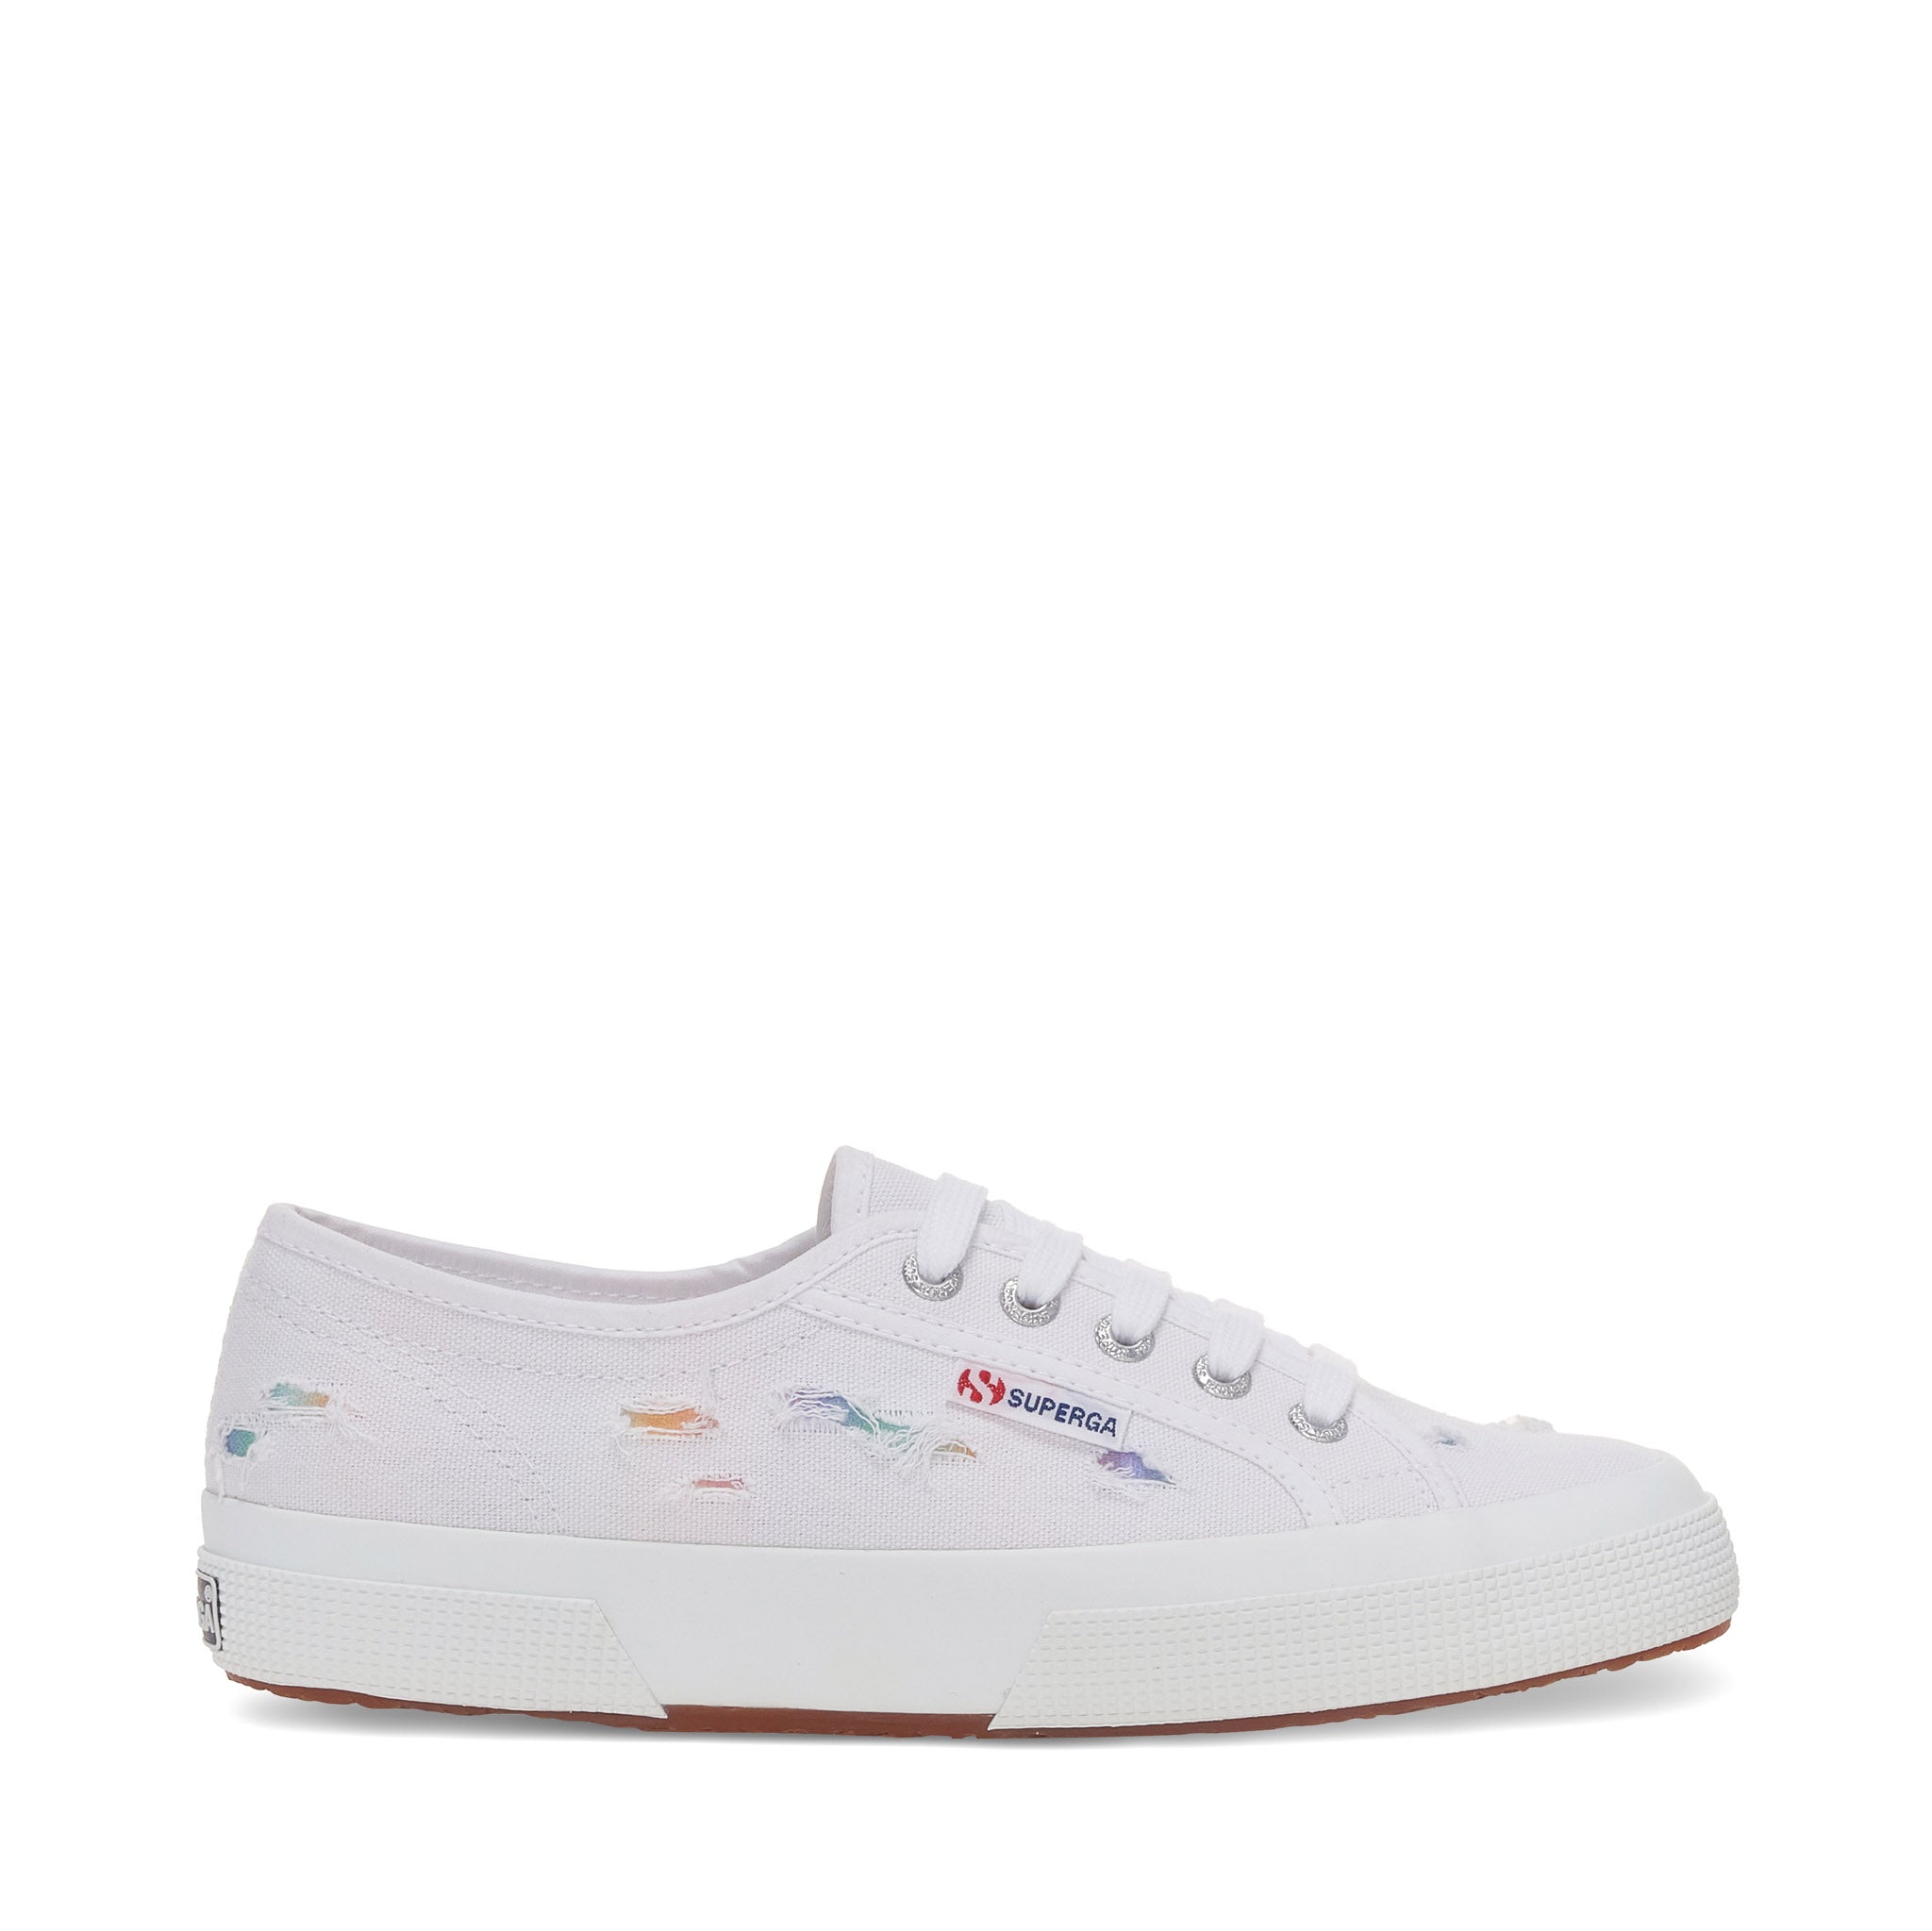 Superga 2750 Ripped Multicolor Cotton Sneakers - White Multicolor Shaded Print. Side view.